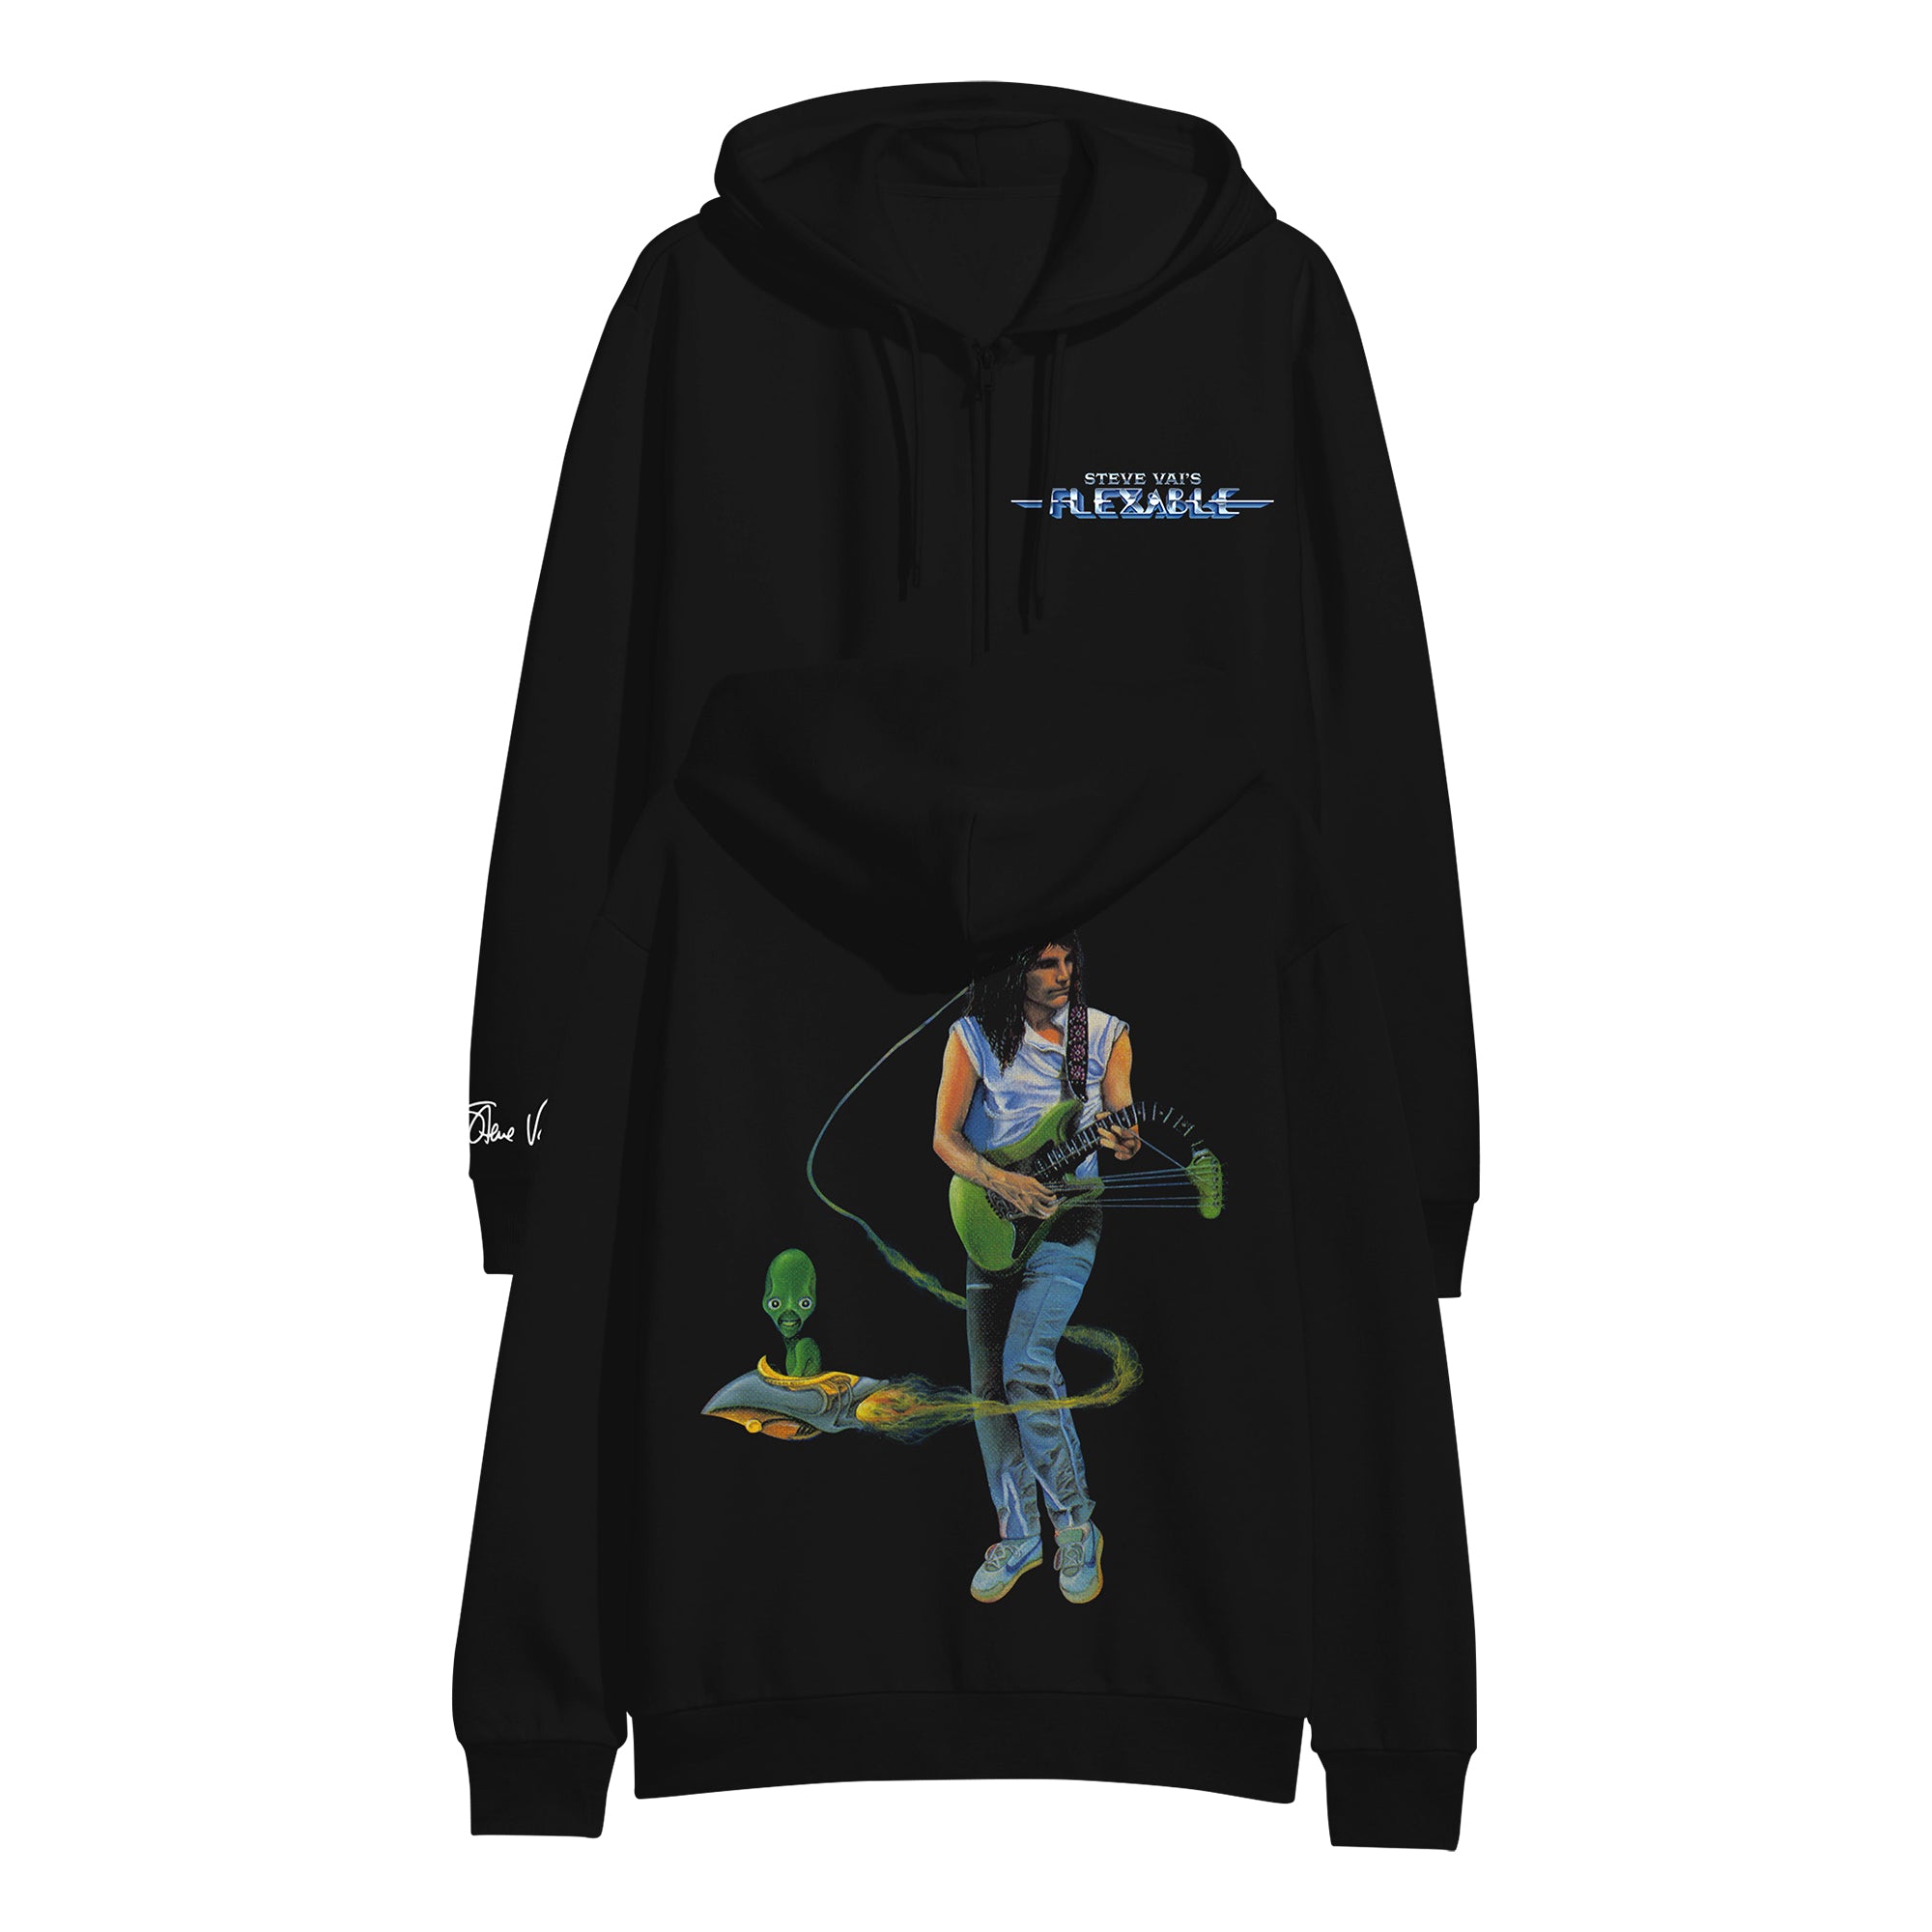 Front and back of black sweatshirt against white background. The left chest says steve vai's flexable in white and blue text. the right sleeve at the bottom in white has steve vai's signature printed on it. The back features a graphic of steve vai playing a green guitar. the neck of the guitar droops down. swirling around steve is an alien in a small ship.